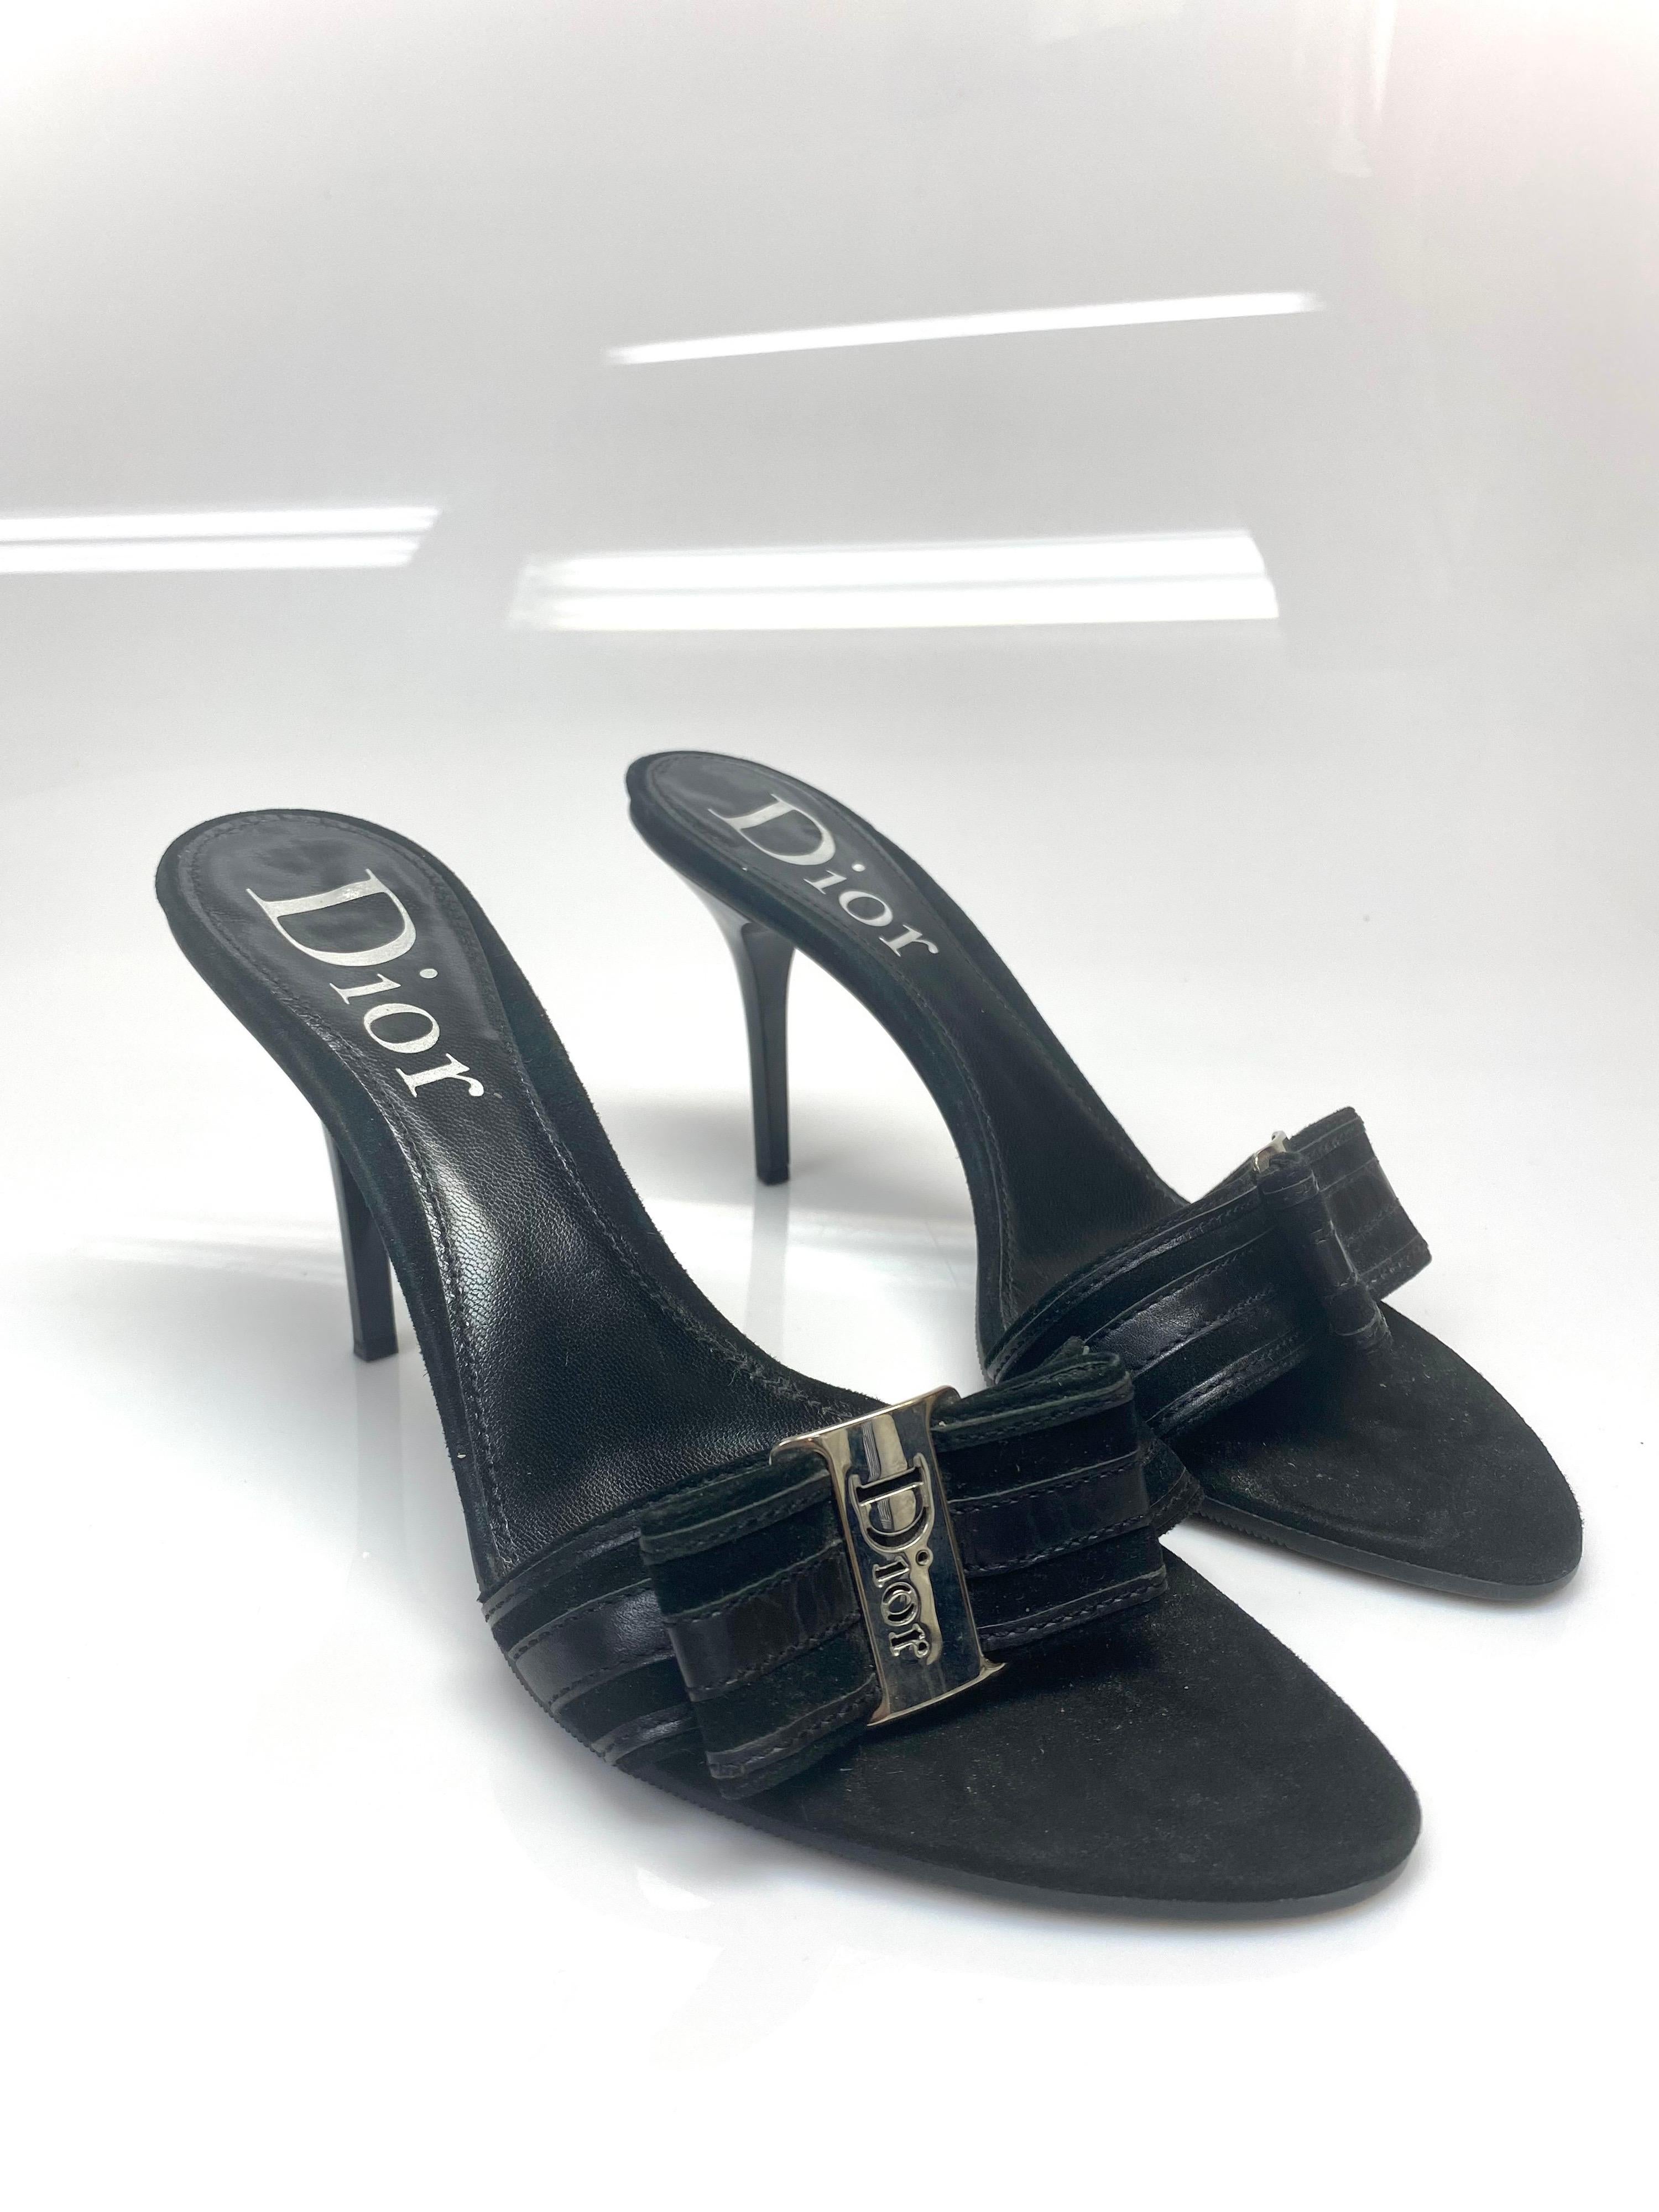 These vintage Dior heeled slides are a truly unique and durable shoe. An engraved Dior silver hardware bow with black striped leather highlights the shoe that gives it an elegant and modern look. The item is in very good condition with some minimal